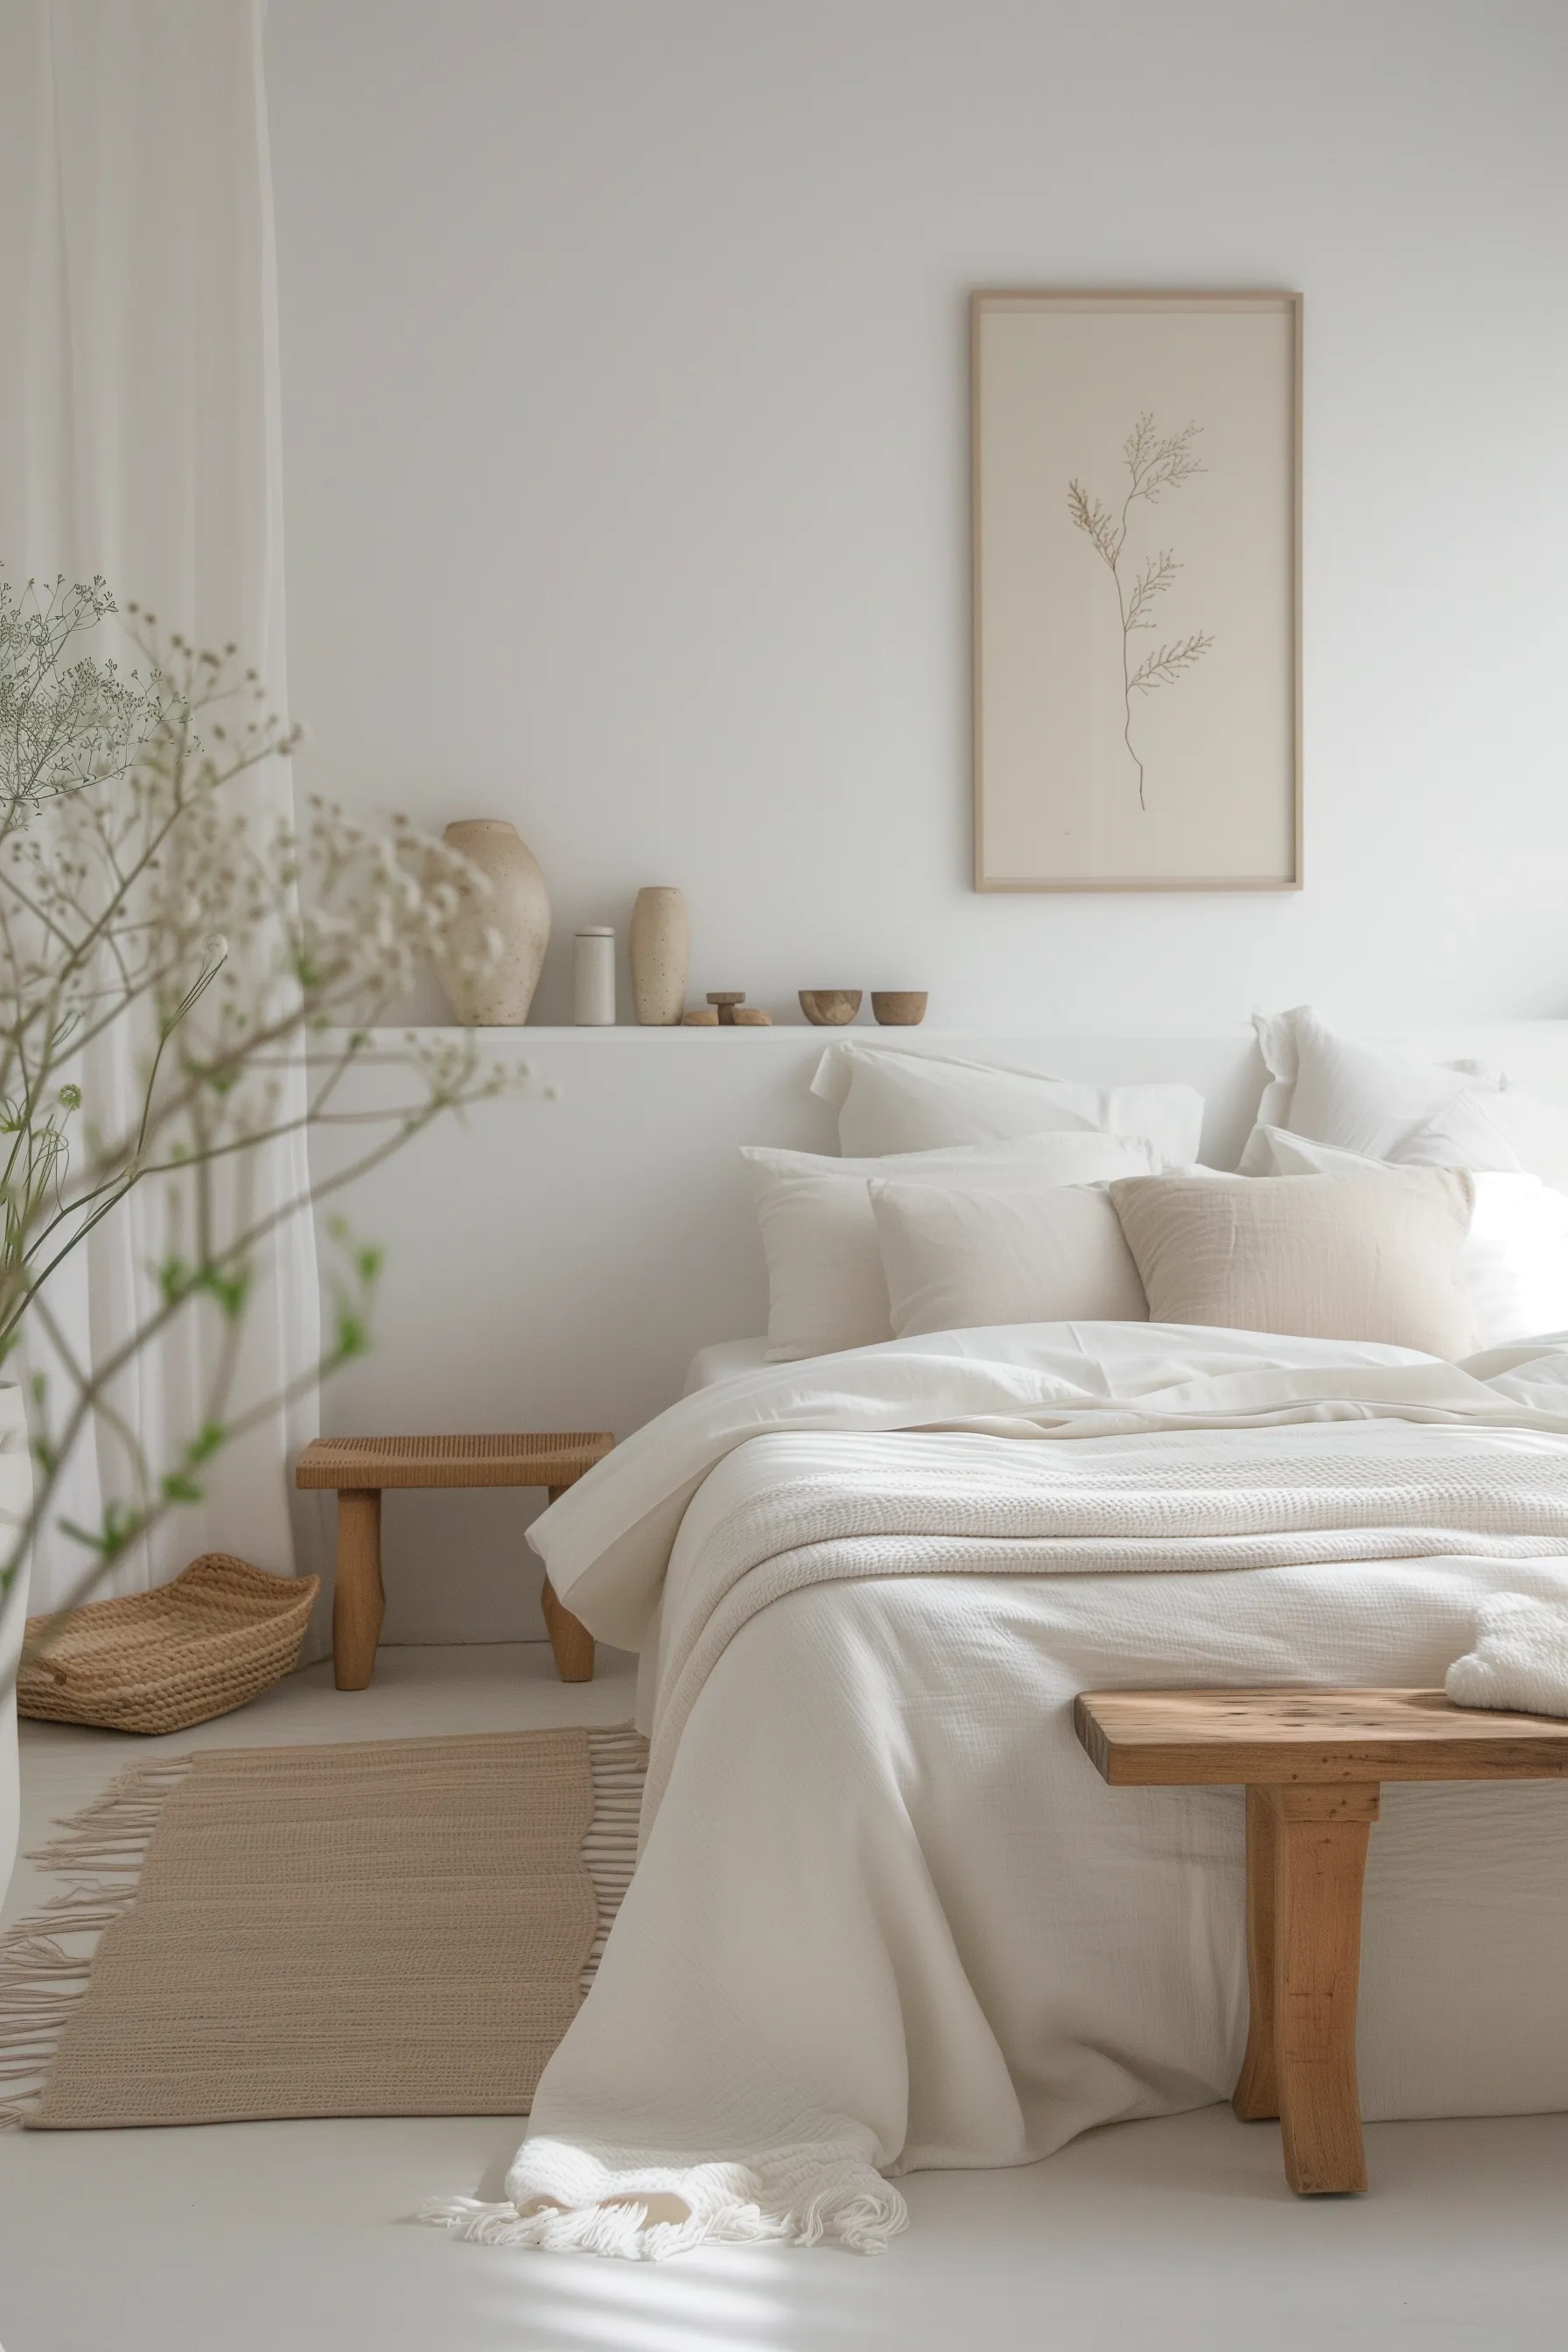 A white bedroom with wooden furniture